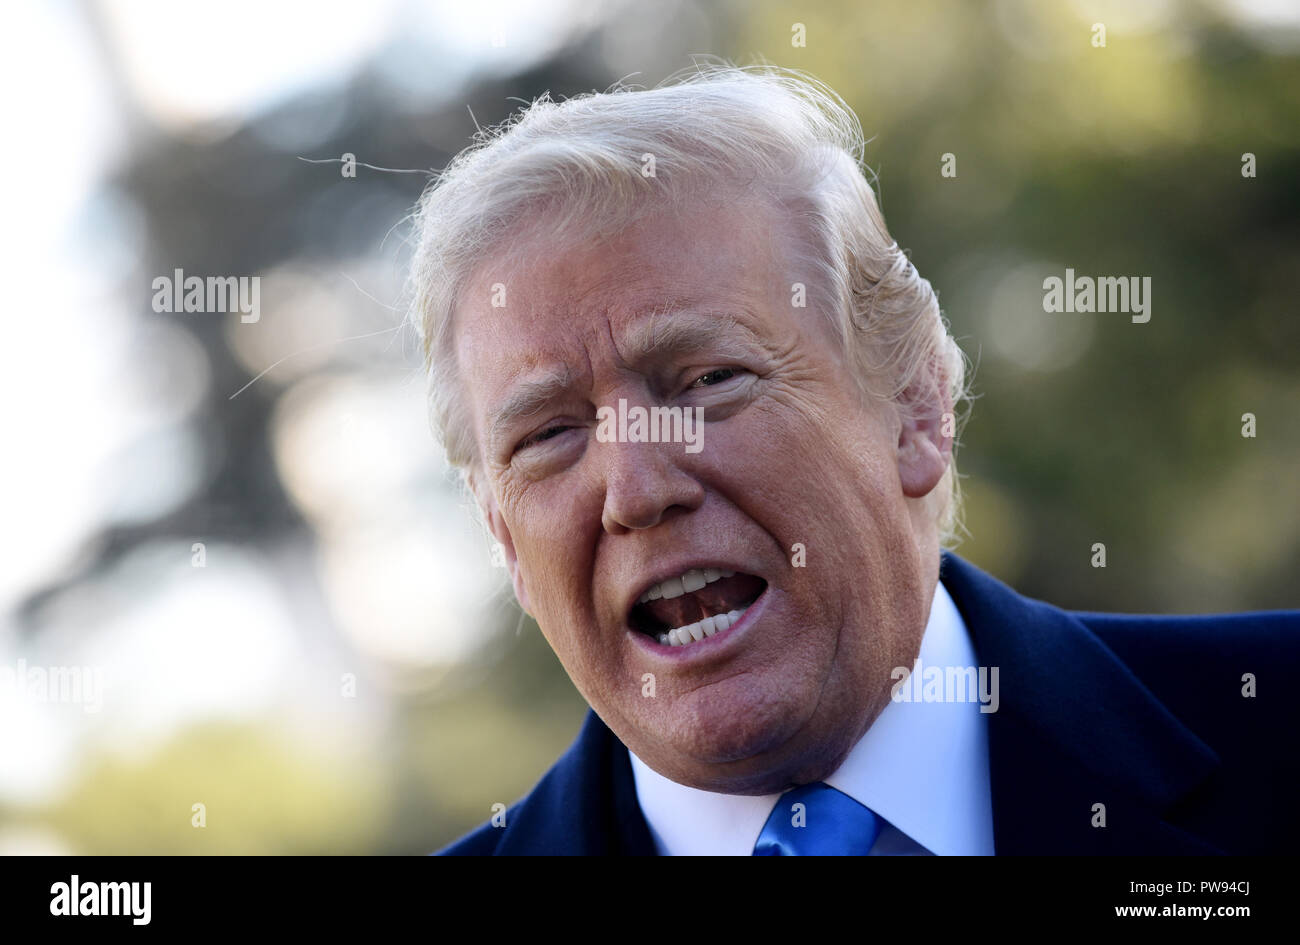 U.S. President Donald Trump speaks to reporters on the South Lawn before boarding Marine One at the White House, on October 13, 2018 in Washington, DC. President Trump is traveling to Kentucky. Credit: Olivier Douliery/Pool via CNP/MediaPunch Stock Photo